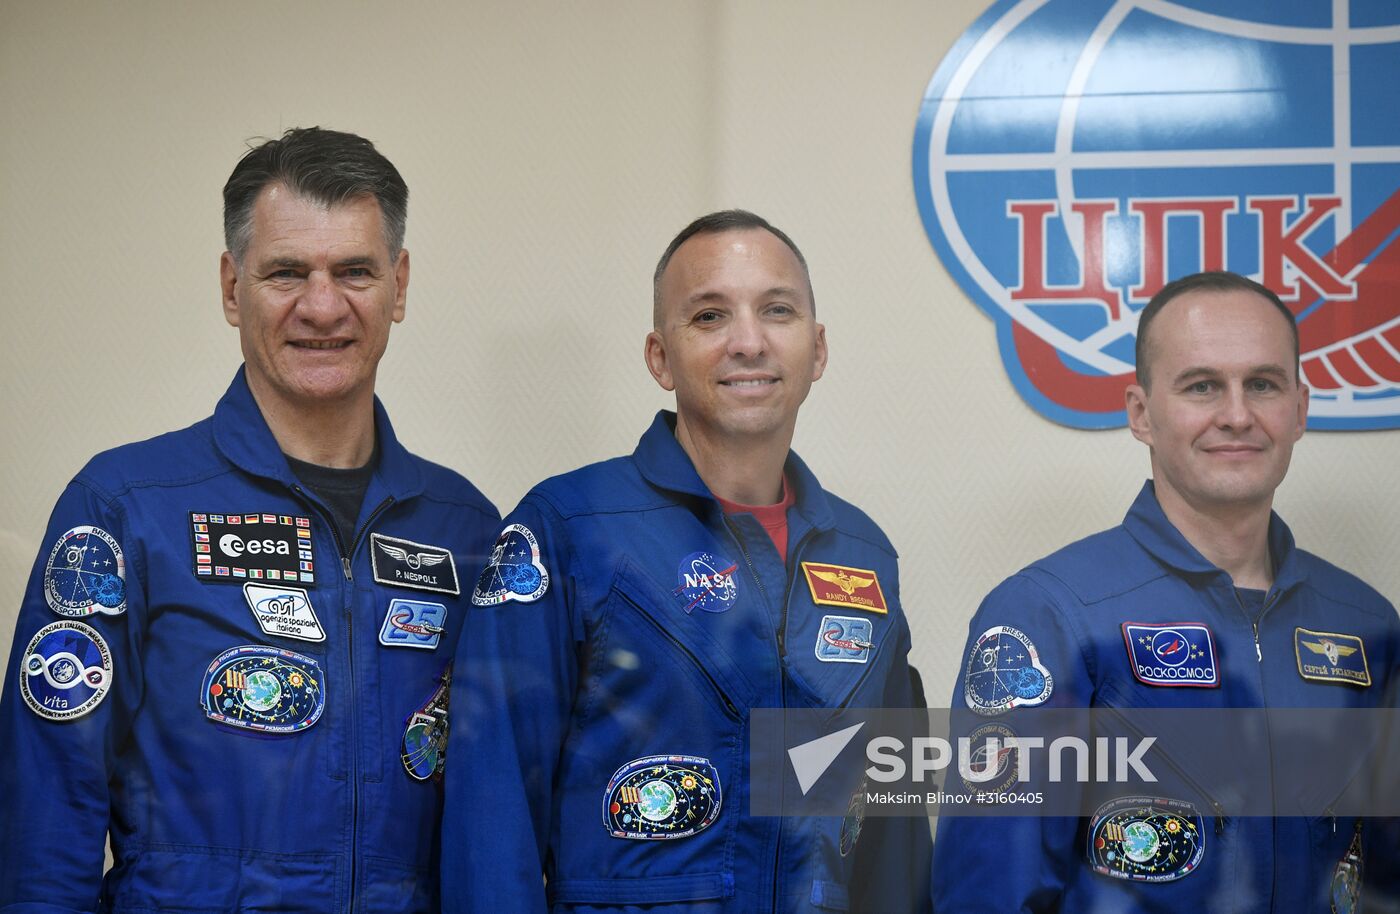 Pre-launch news conference of 52/53 ISS expedition crews